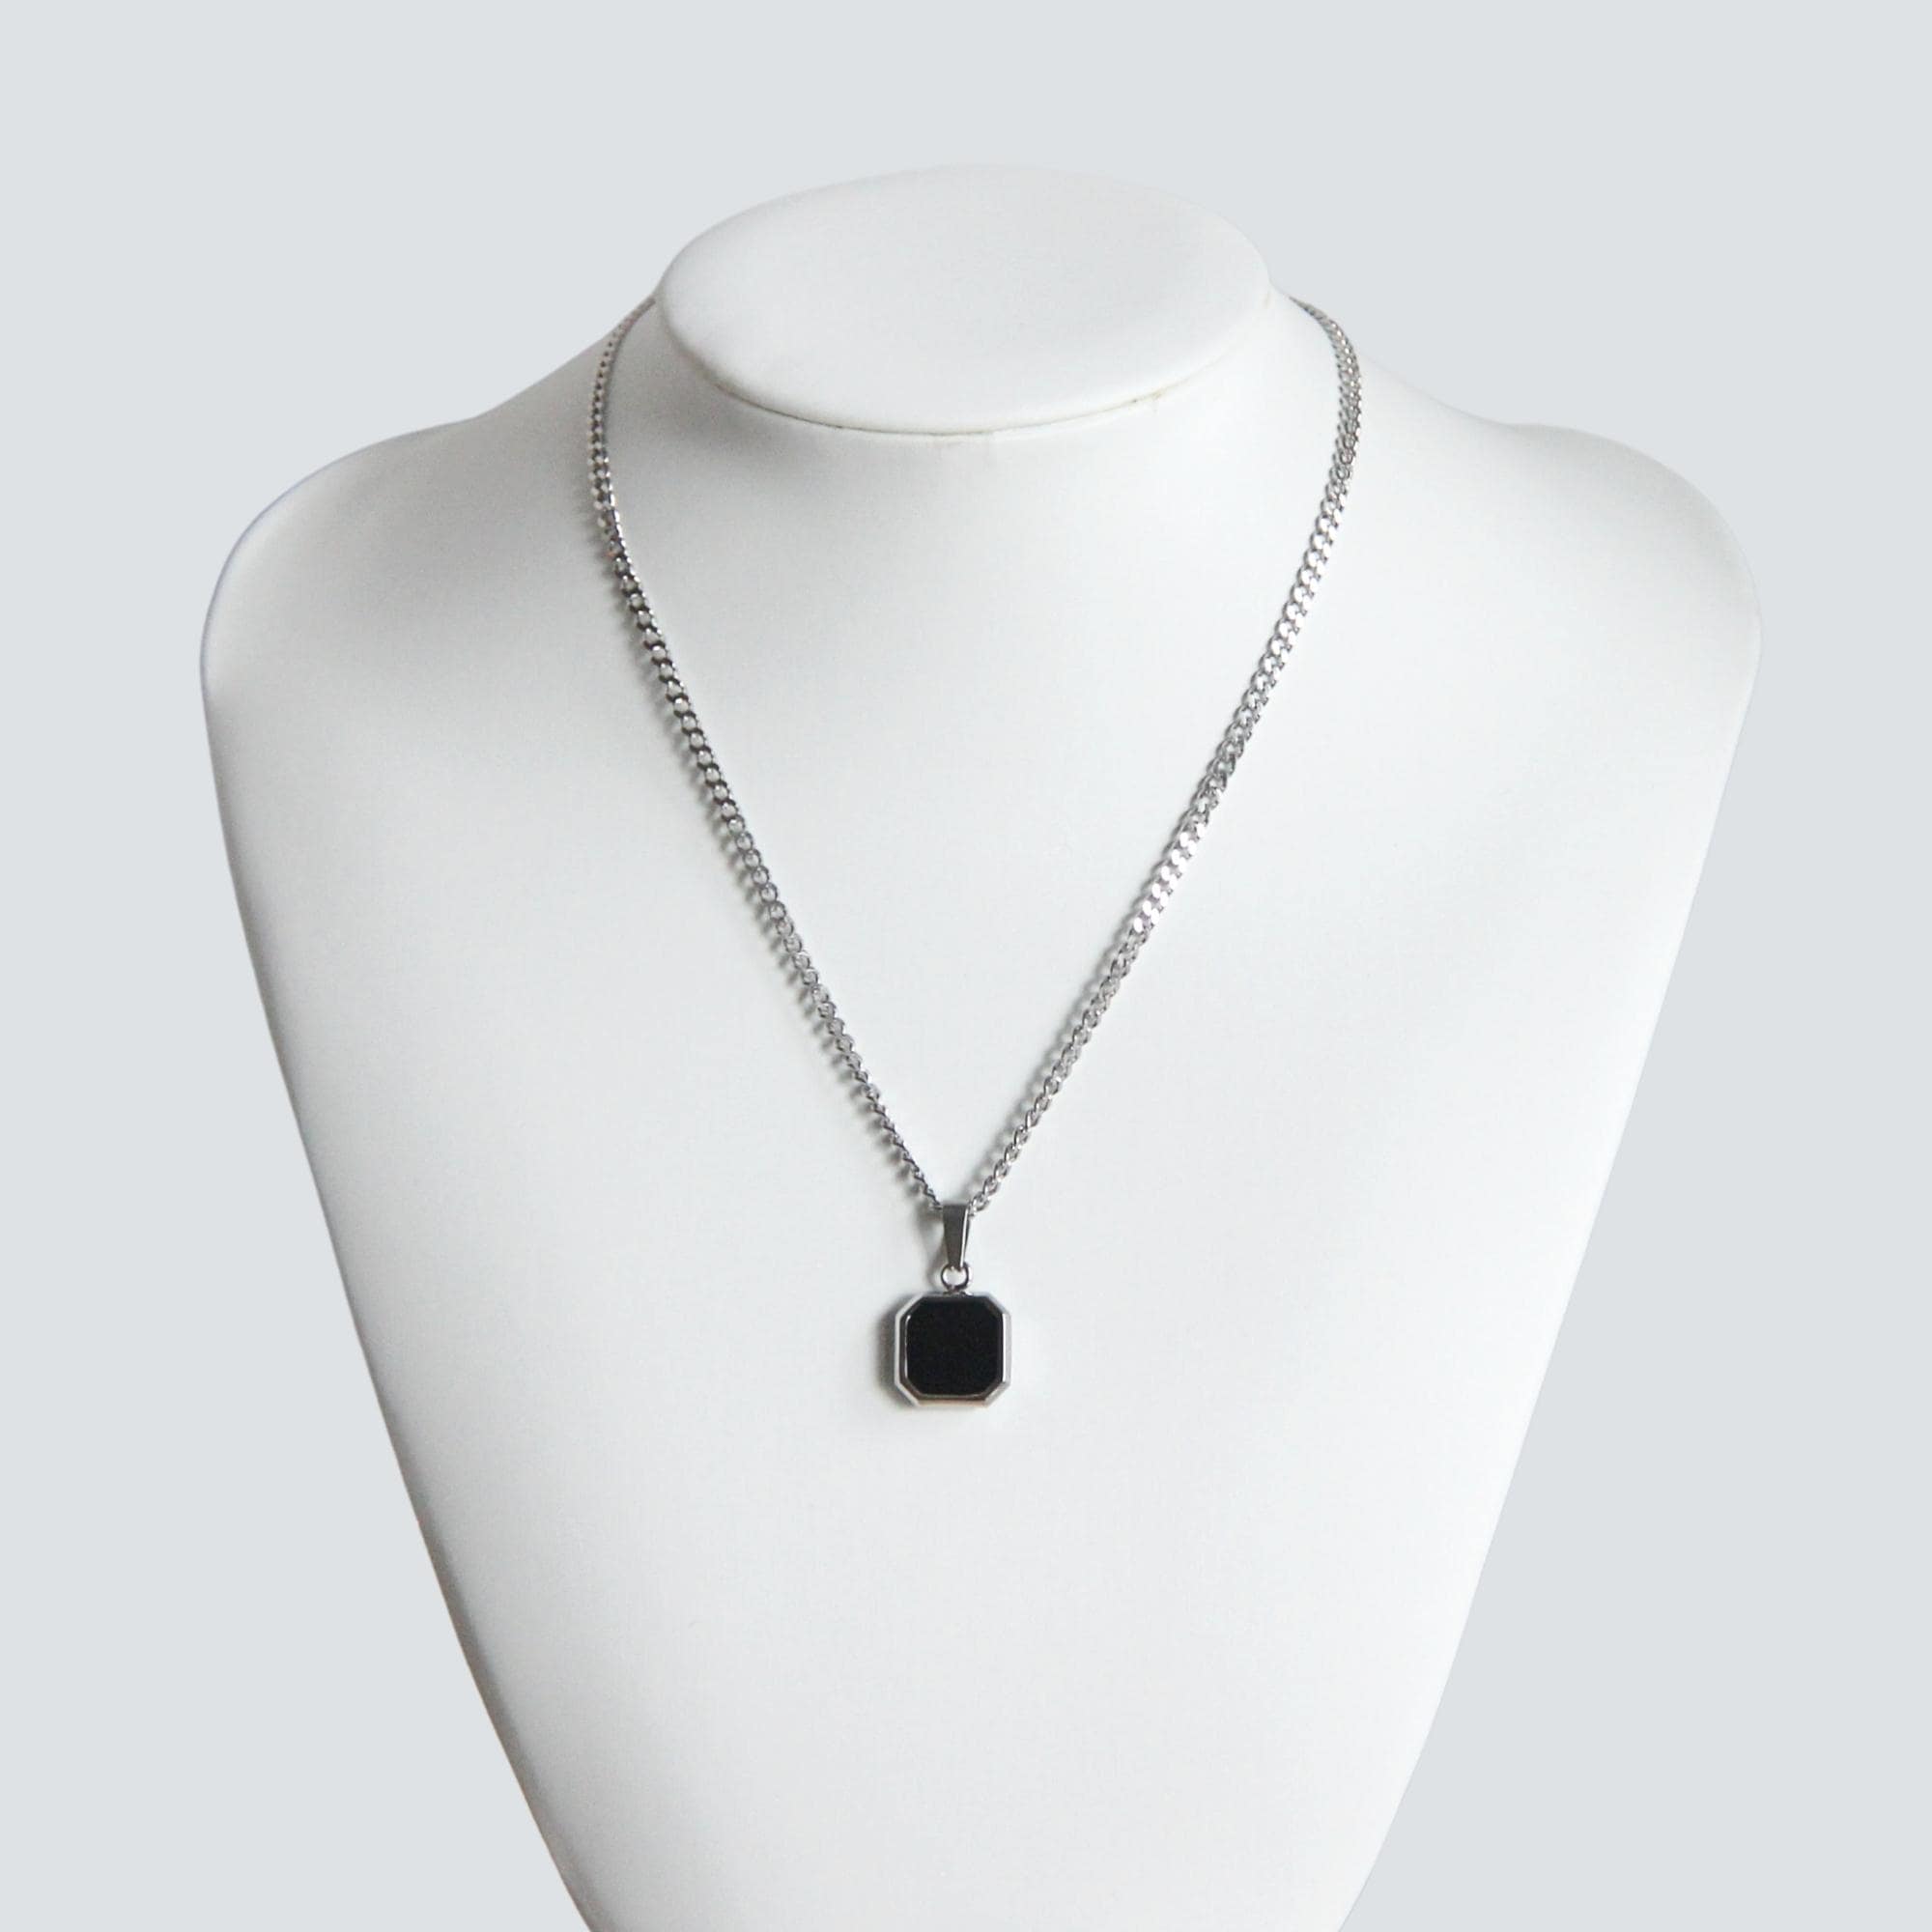 Silver Black, White or Blue Square Pendant Necklace For Men or